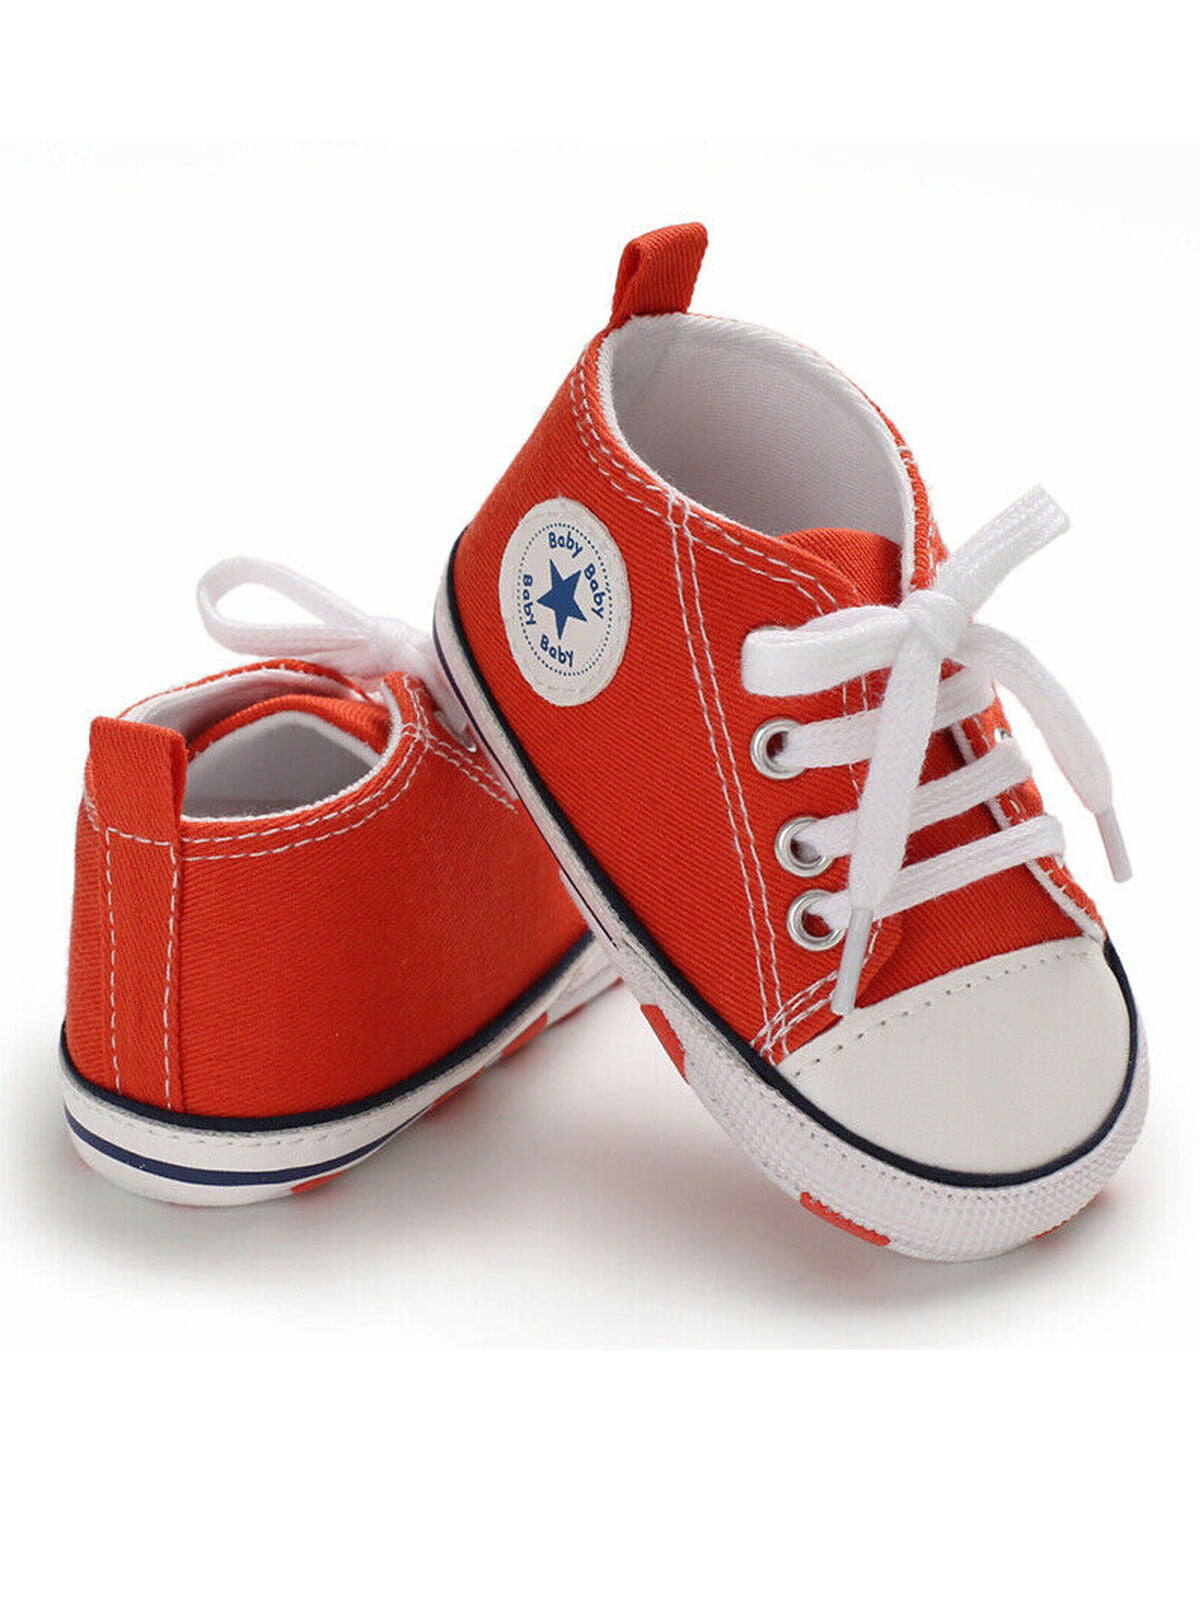 baby high top shoes